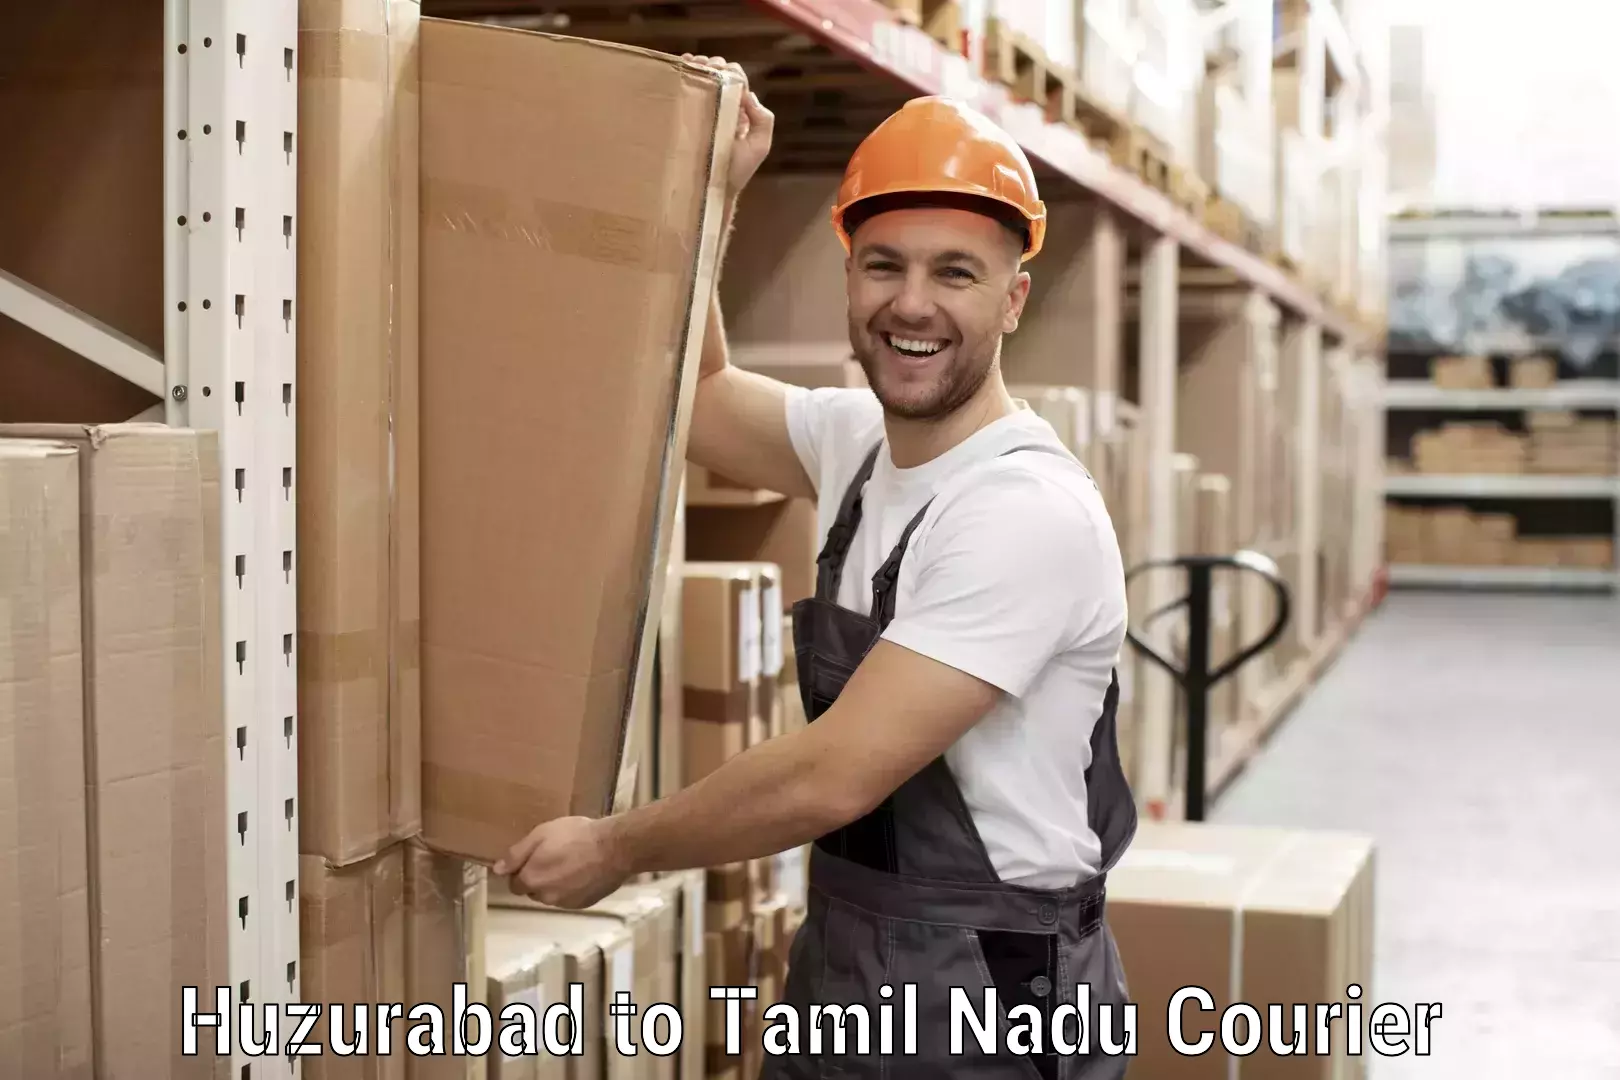 Advanced shipping services Huzurabad to Trichy